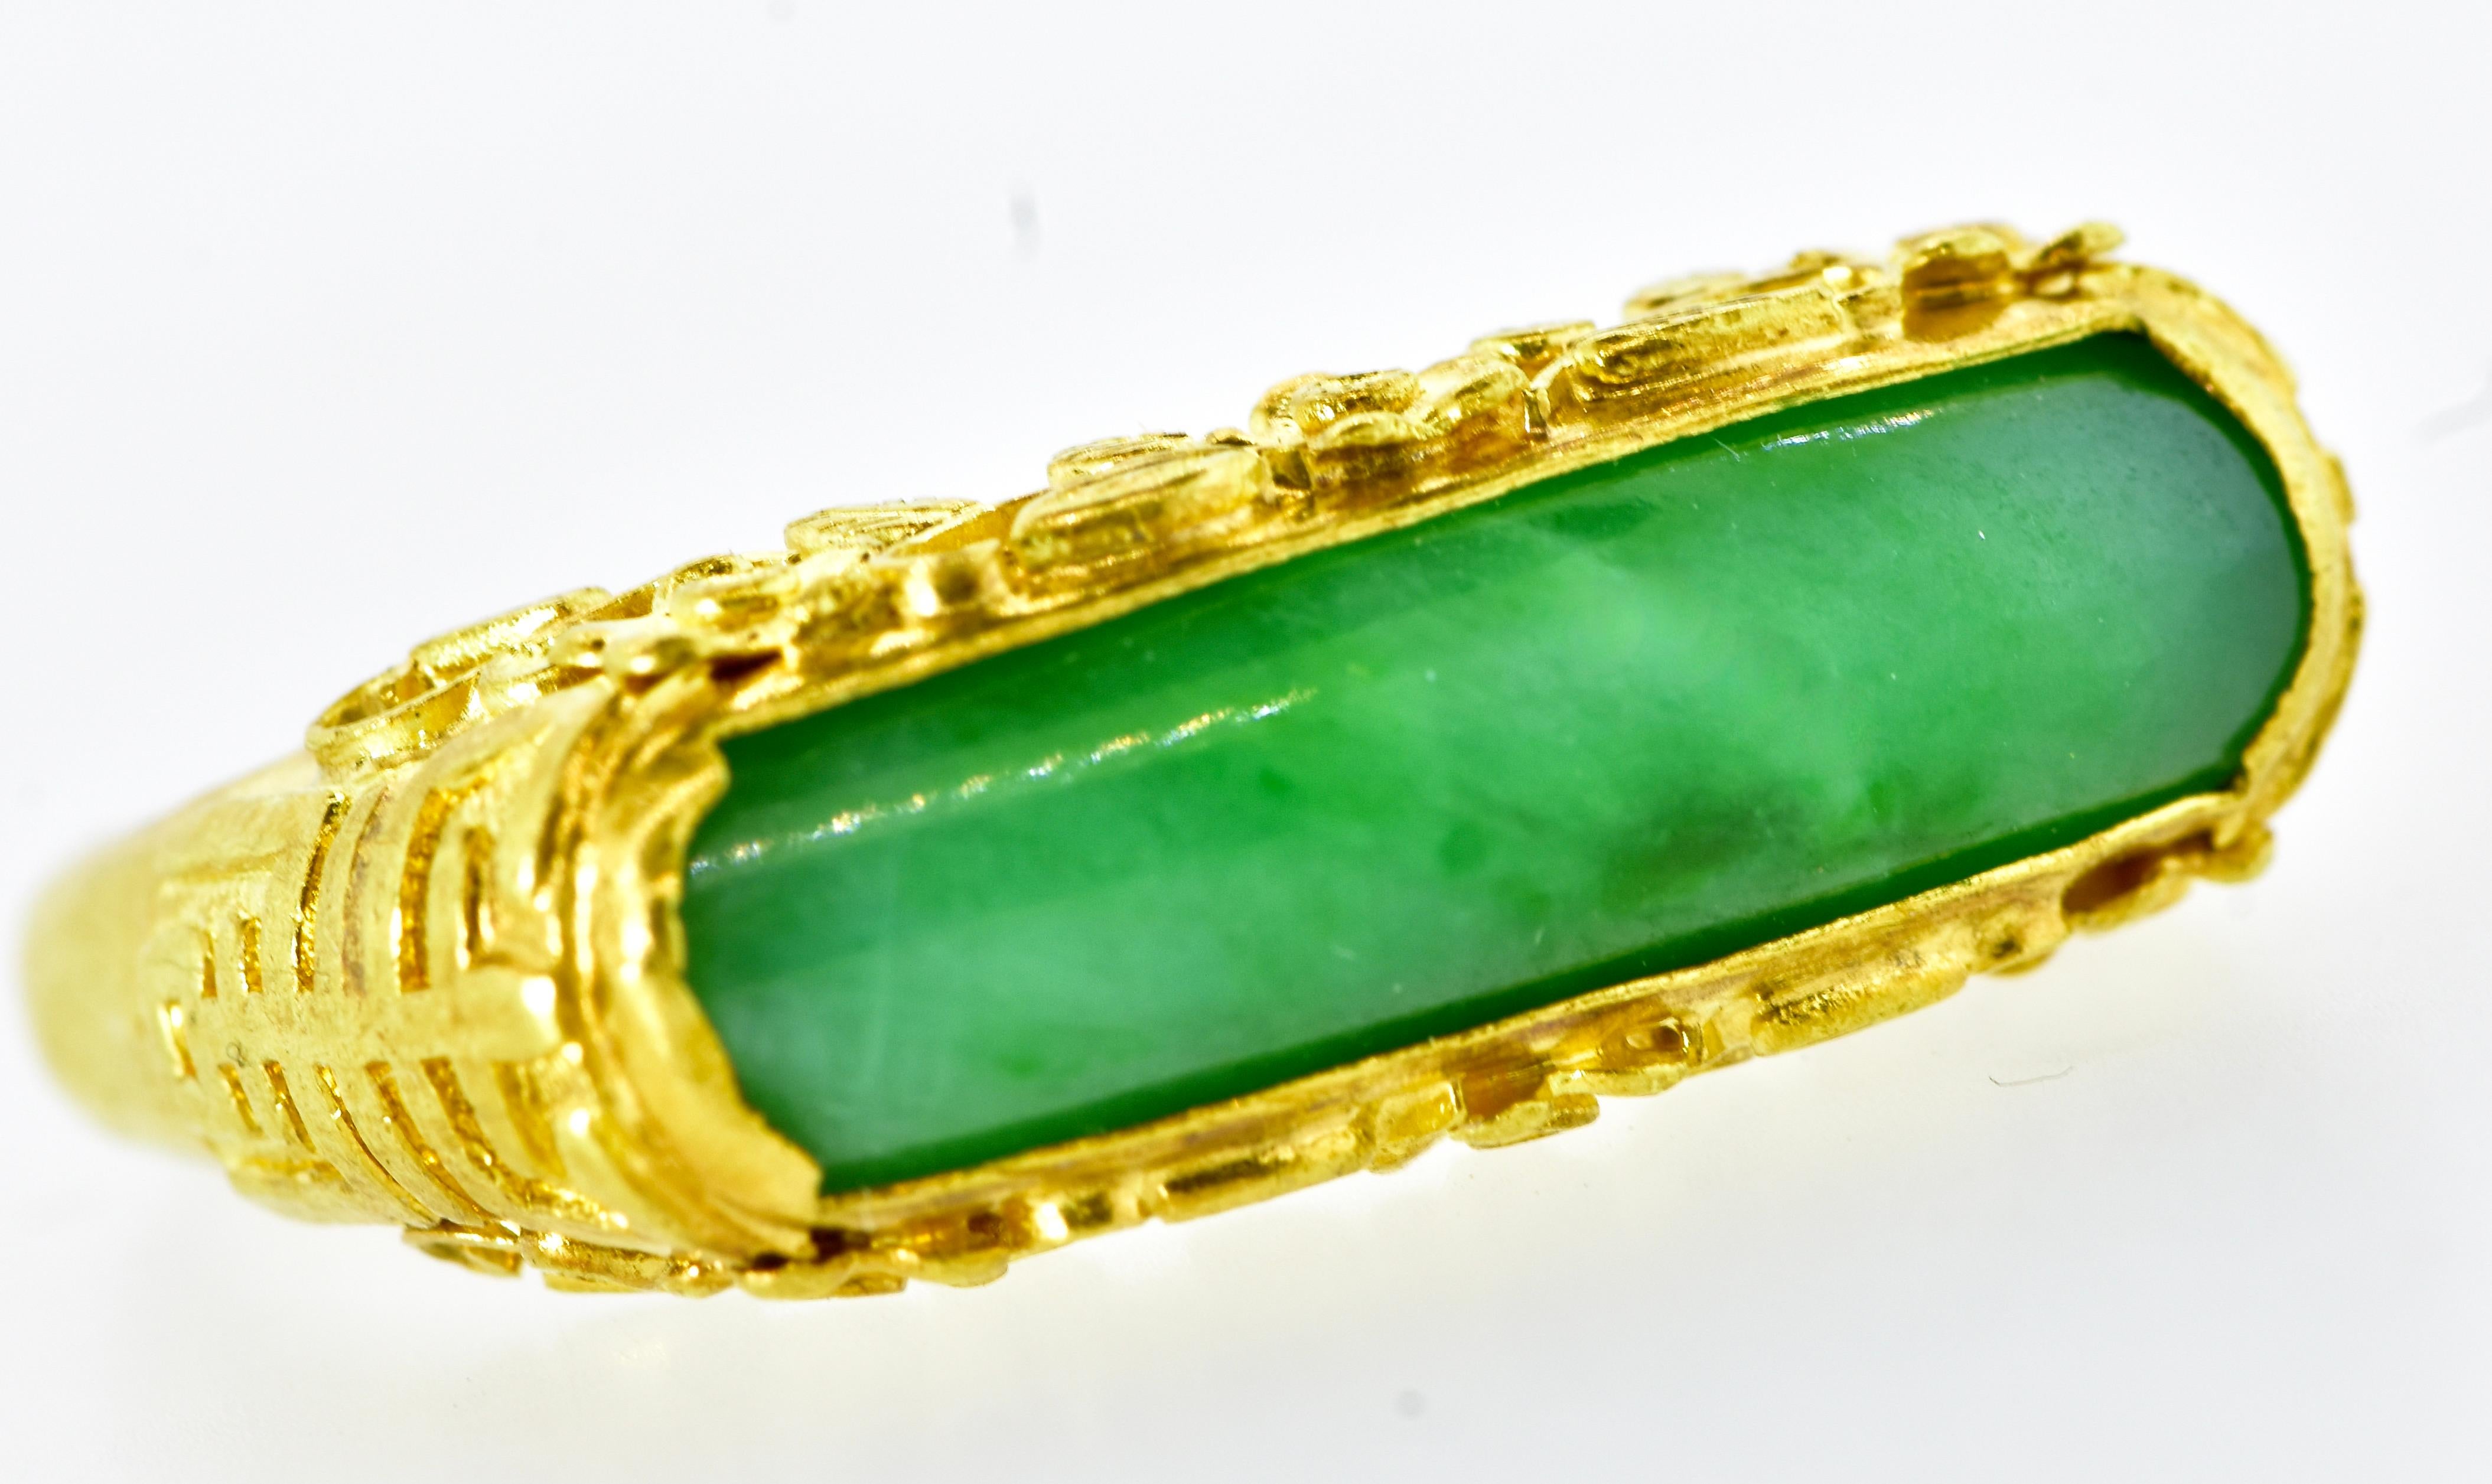 Cabochon Jadeite Jade and 20k Yellow Gold Vintage Flower Motif Saddle Ring, circa 1900 For Sale